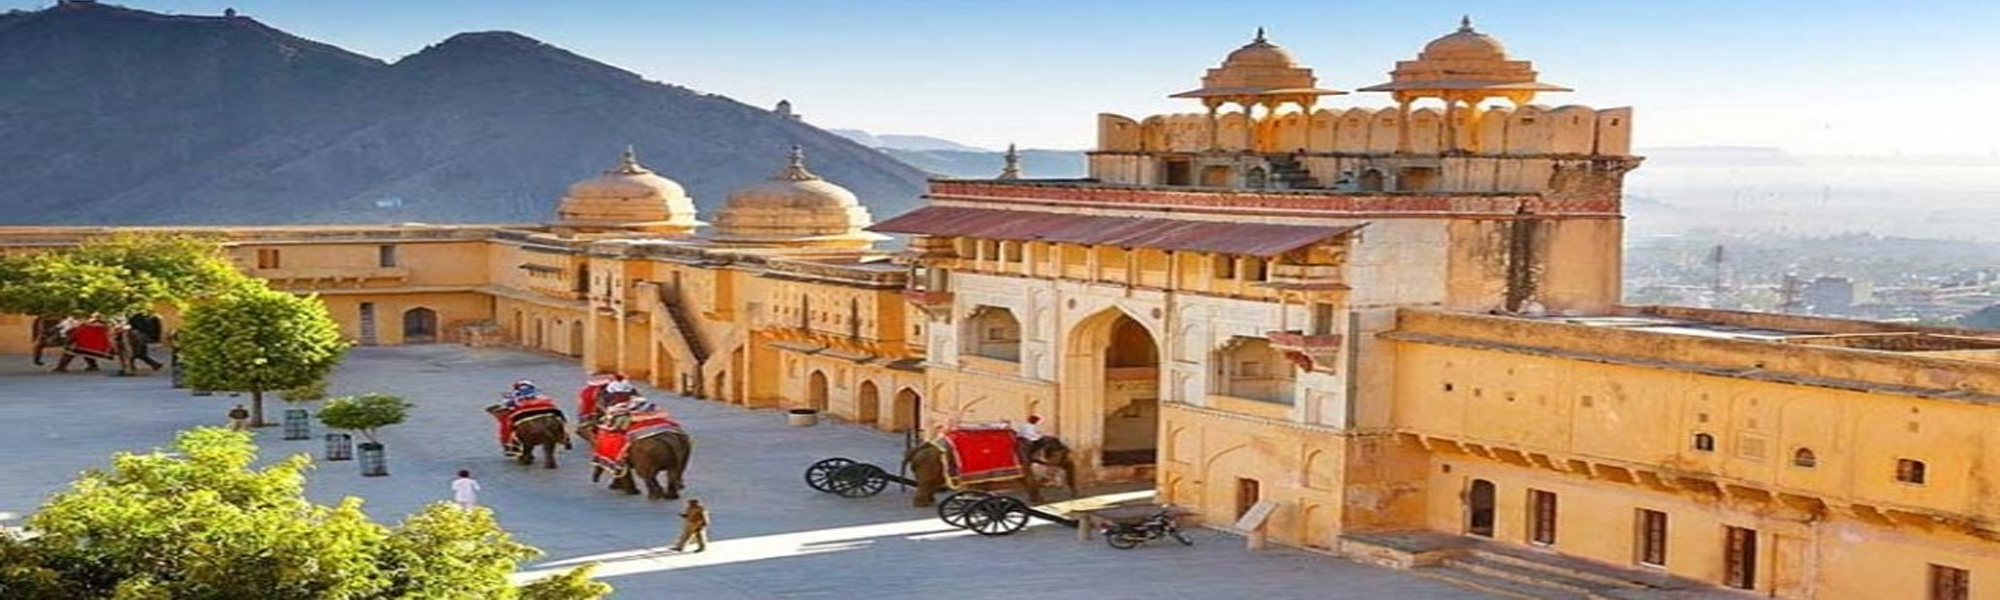 Desert Festival Tour in Rajasthan with Fort and Palaces Tour in Rajasthan  